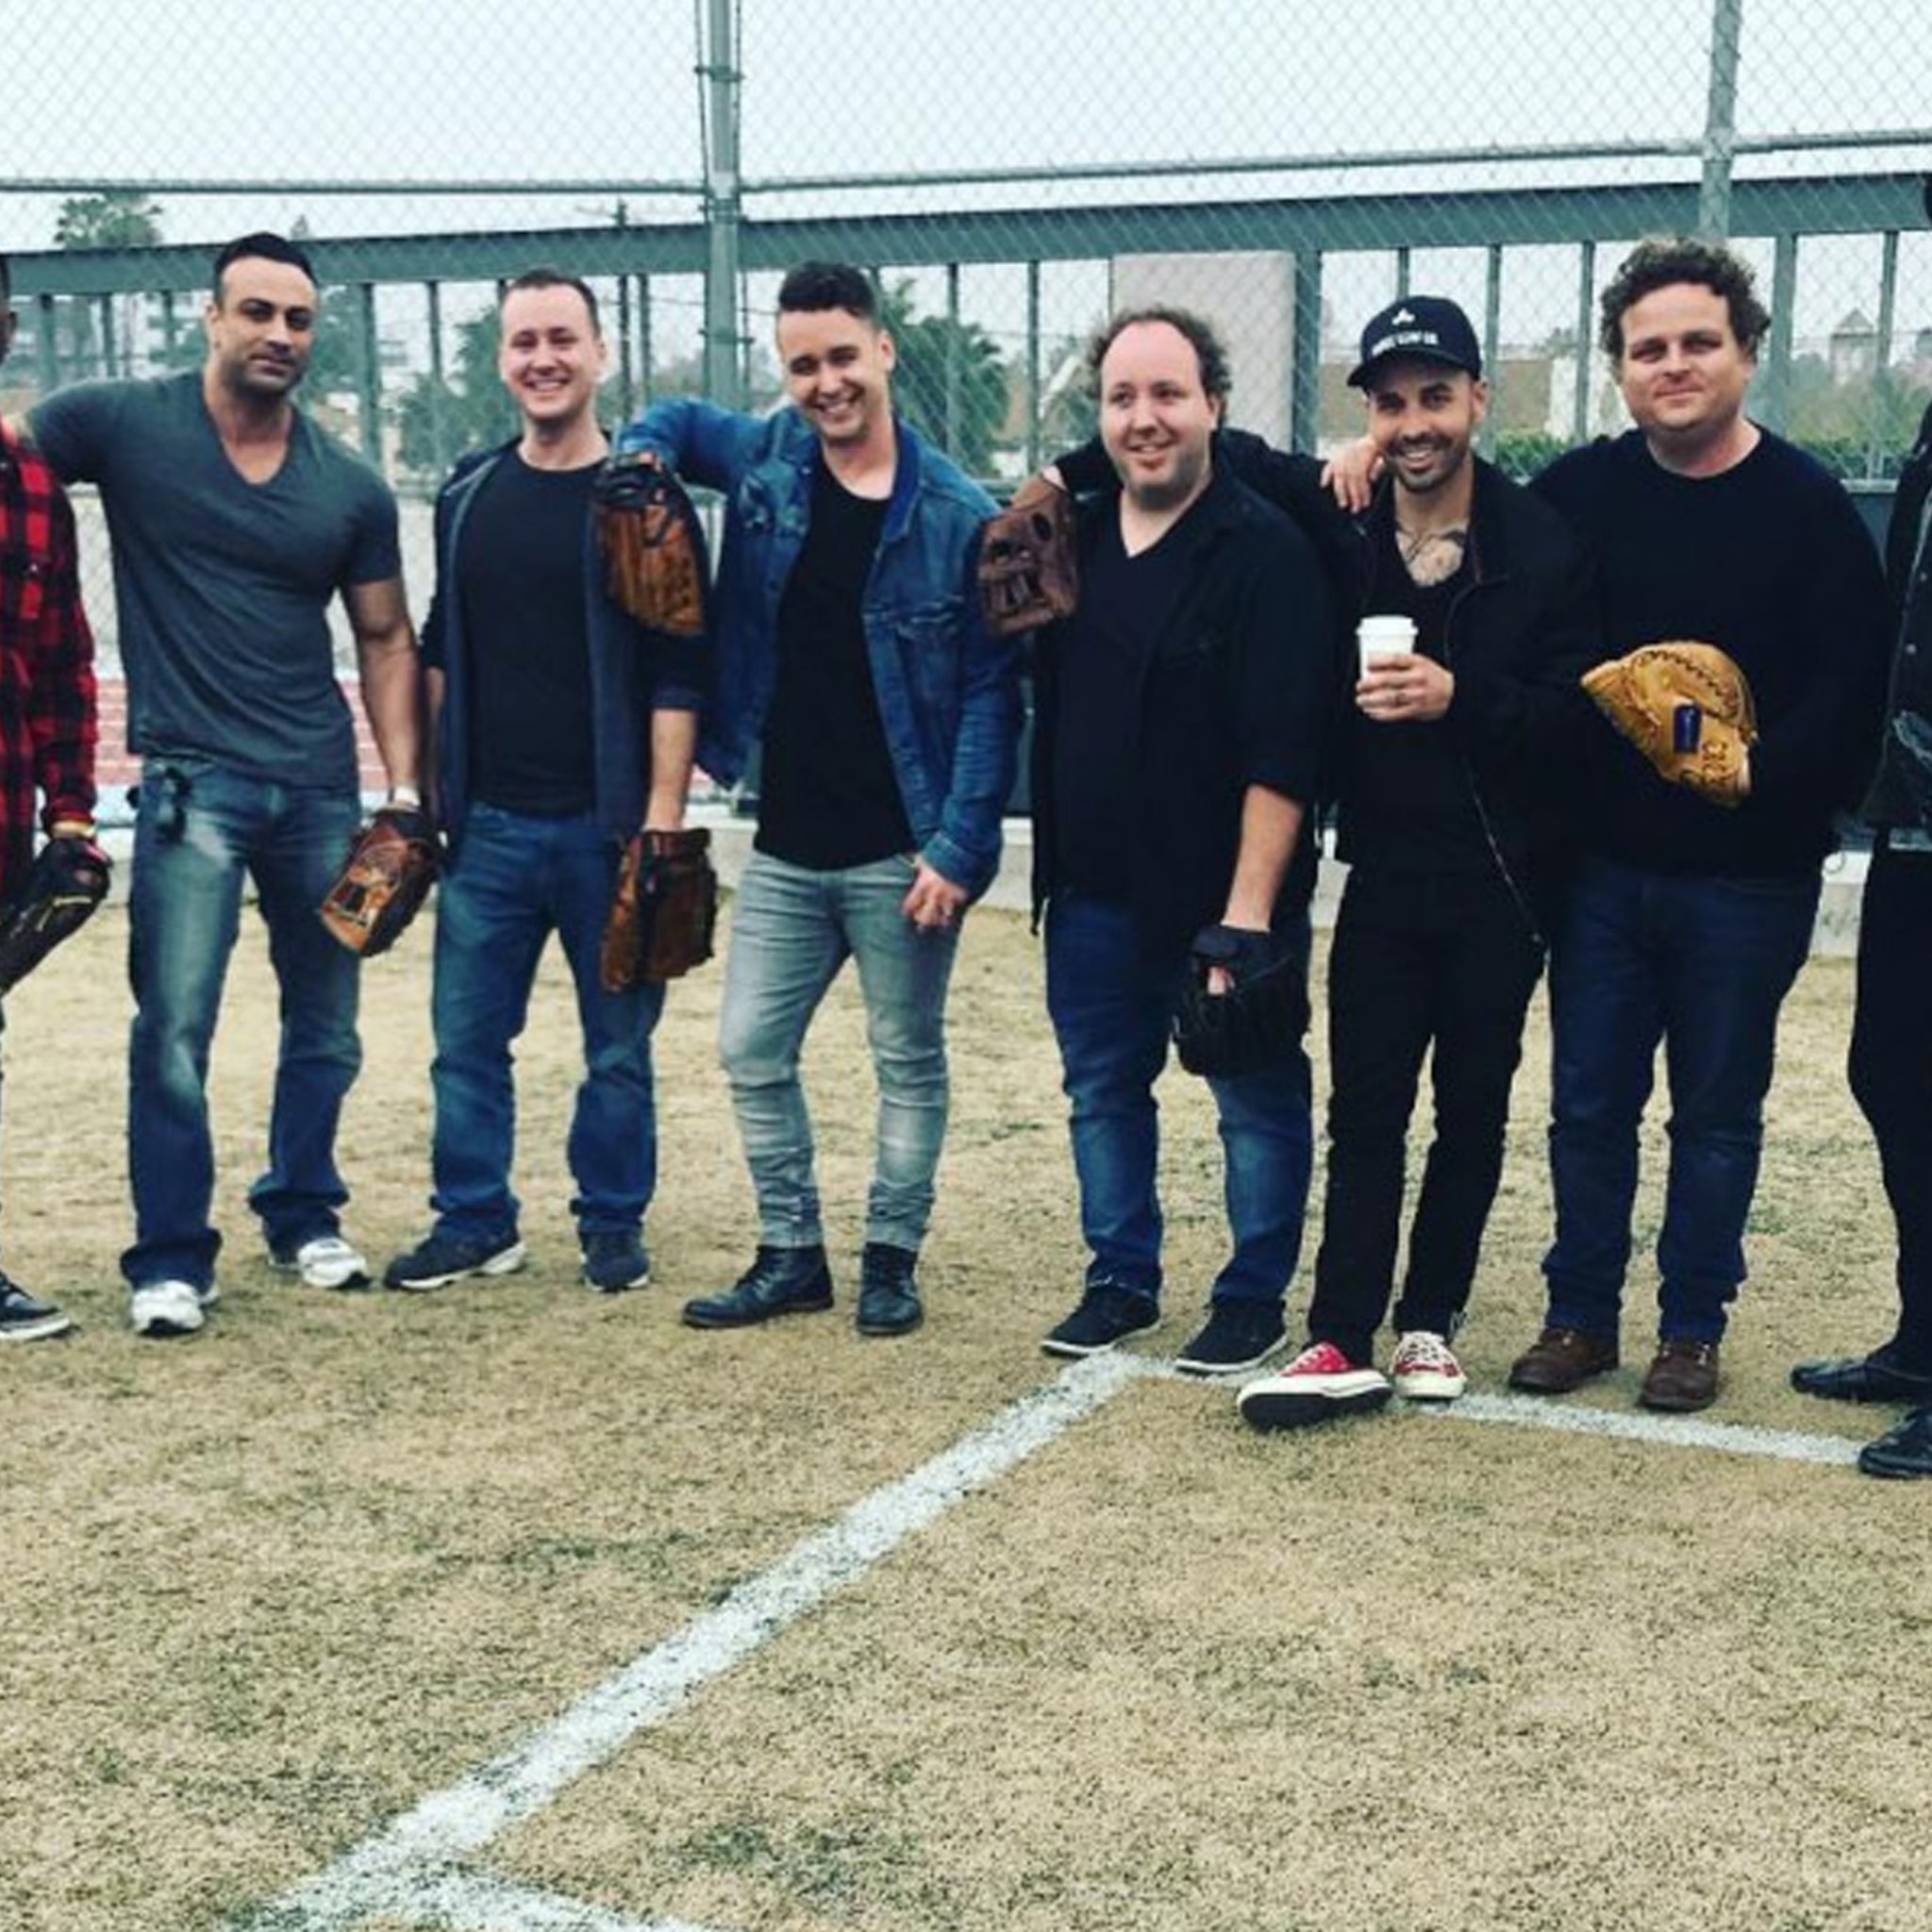 The Sandlot' Cast: Where Are They Now?